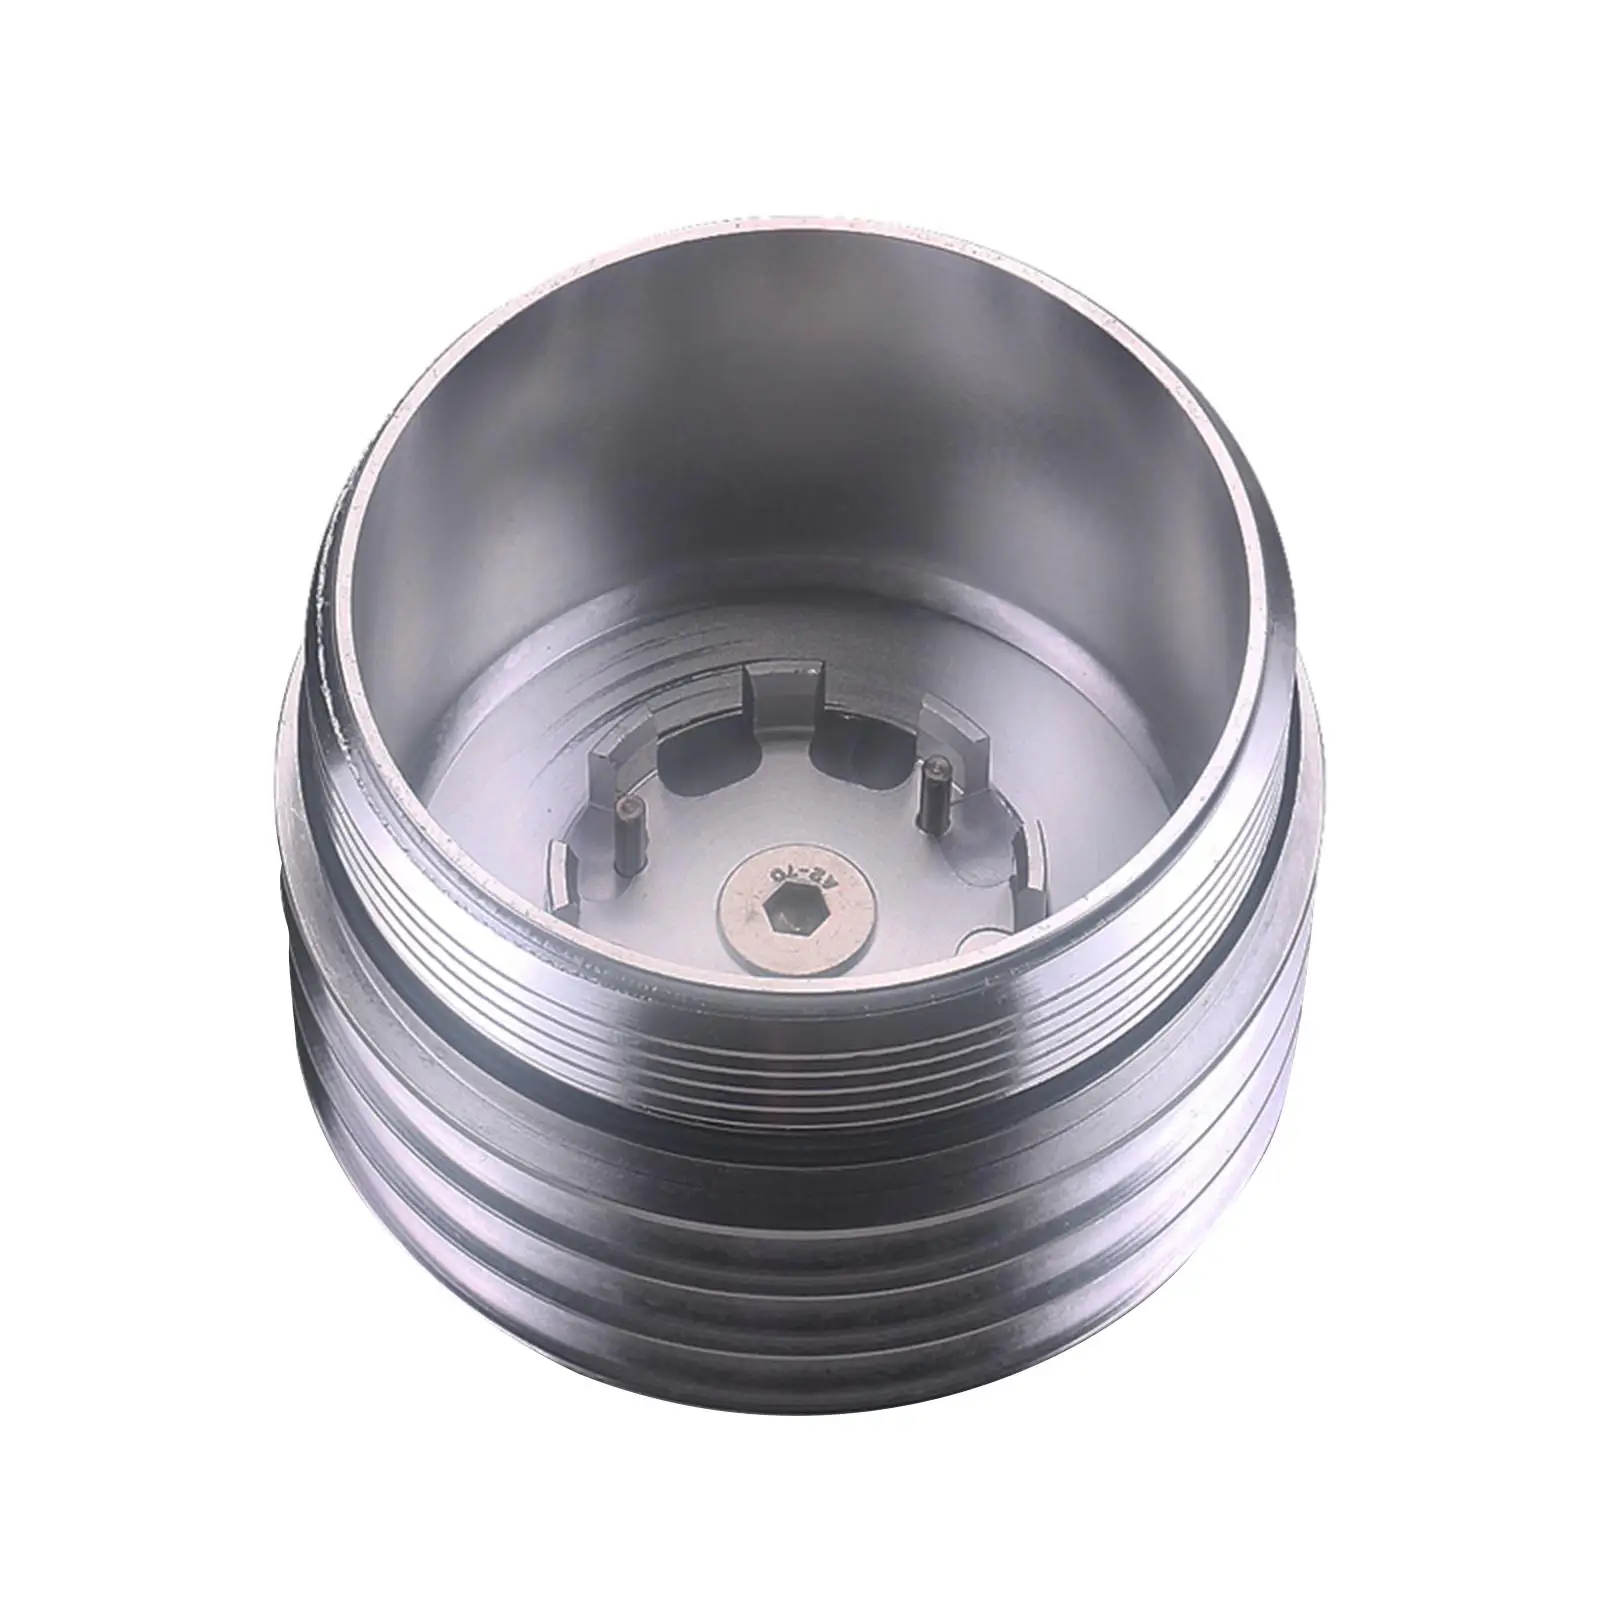 Oil Filter Cover Spare Parts Aluminum Alloy for BMW N54 F30 2.0T